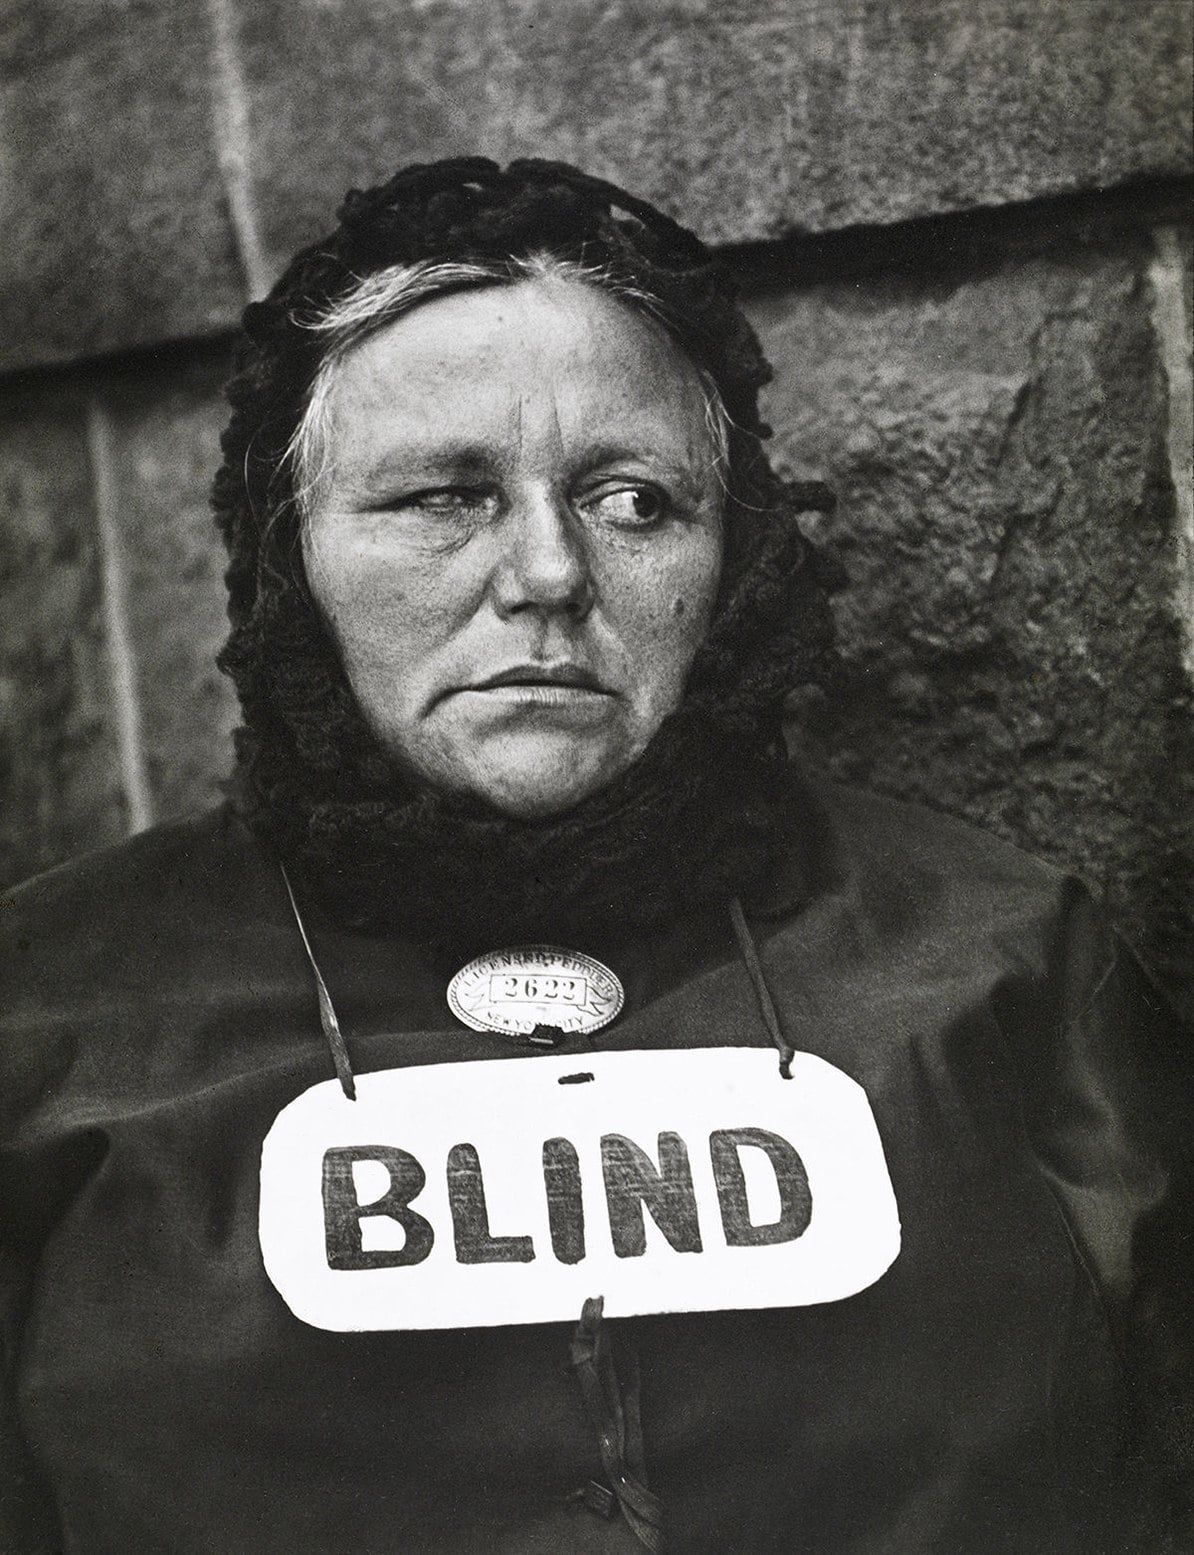 We reveal the keys to the Blind Woman photograph